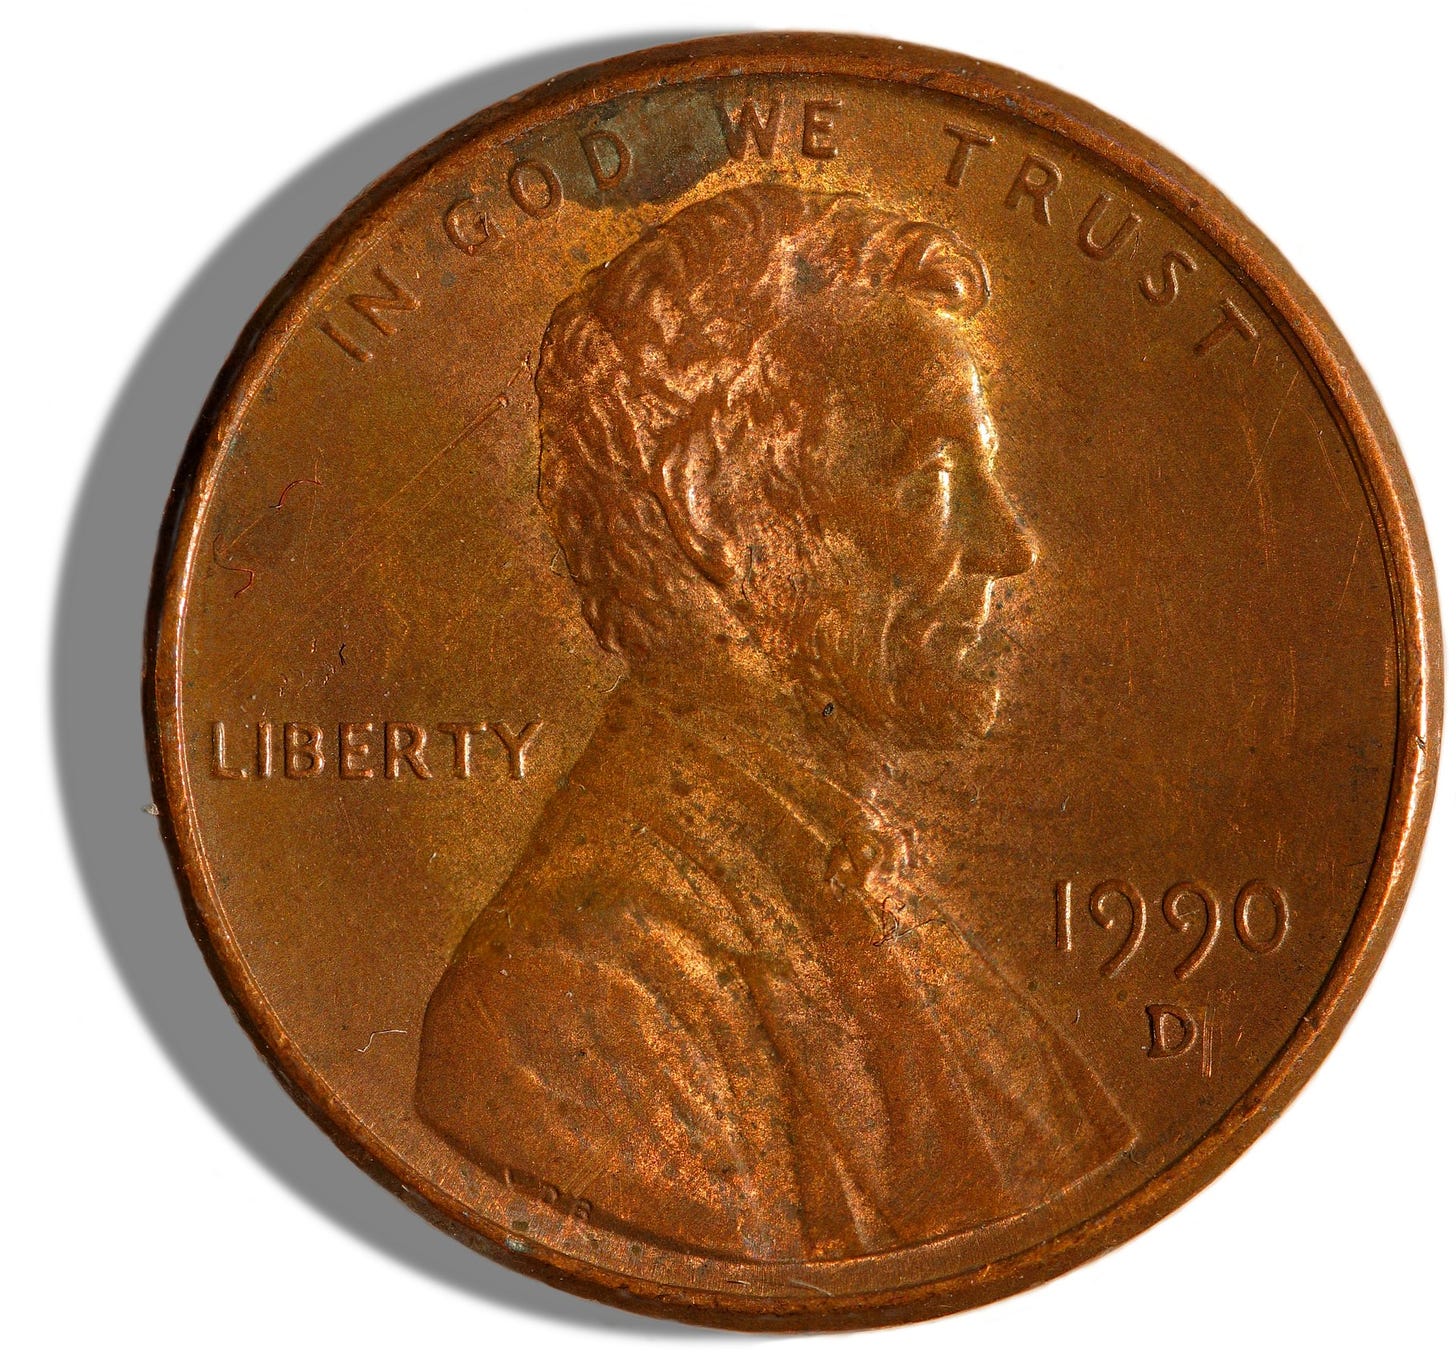 Obverse side of a cent after 17 years of circulation